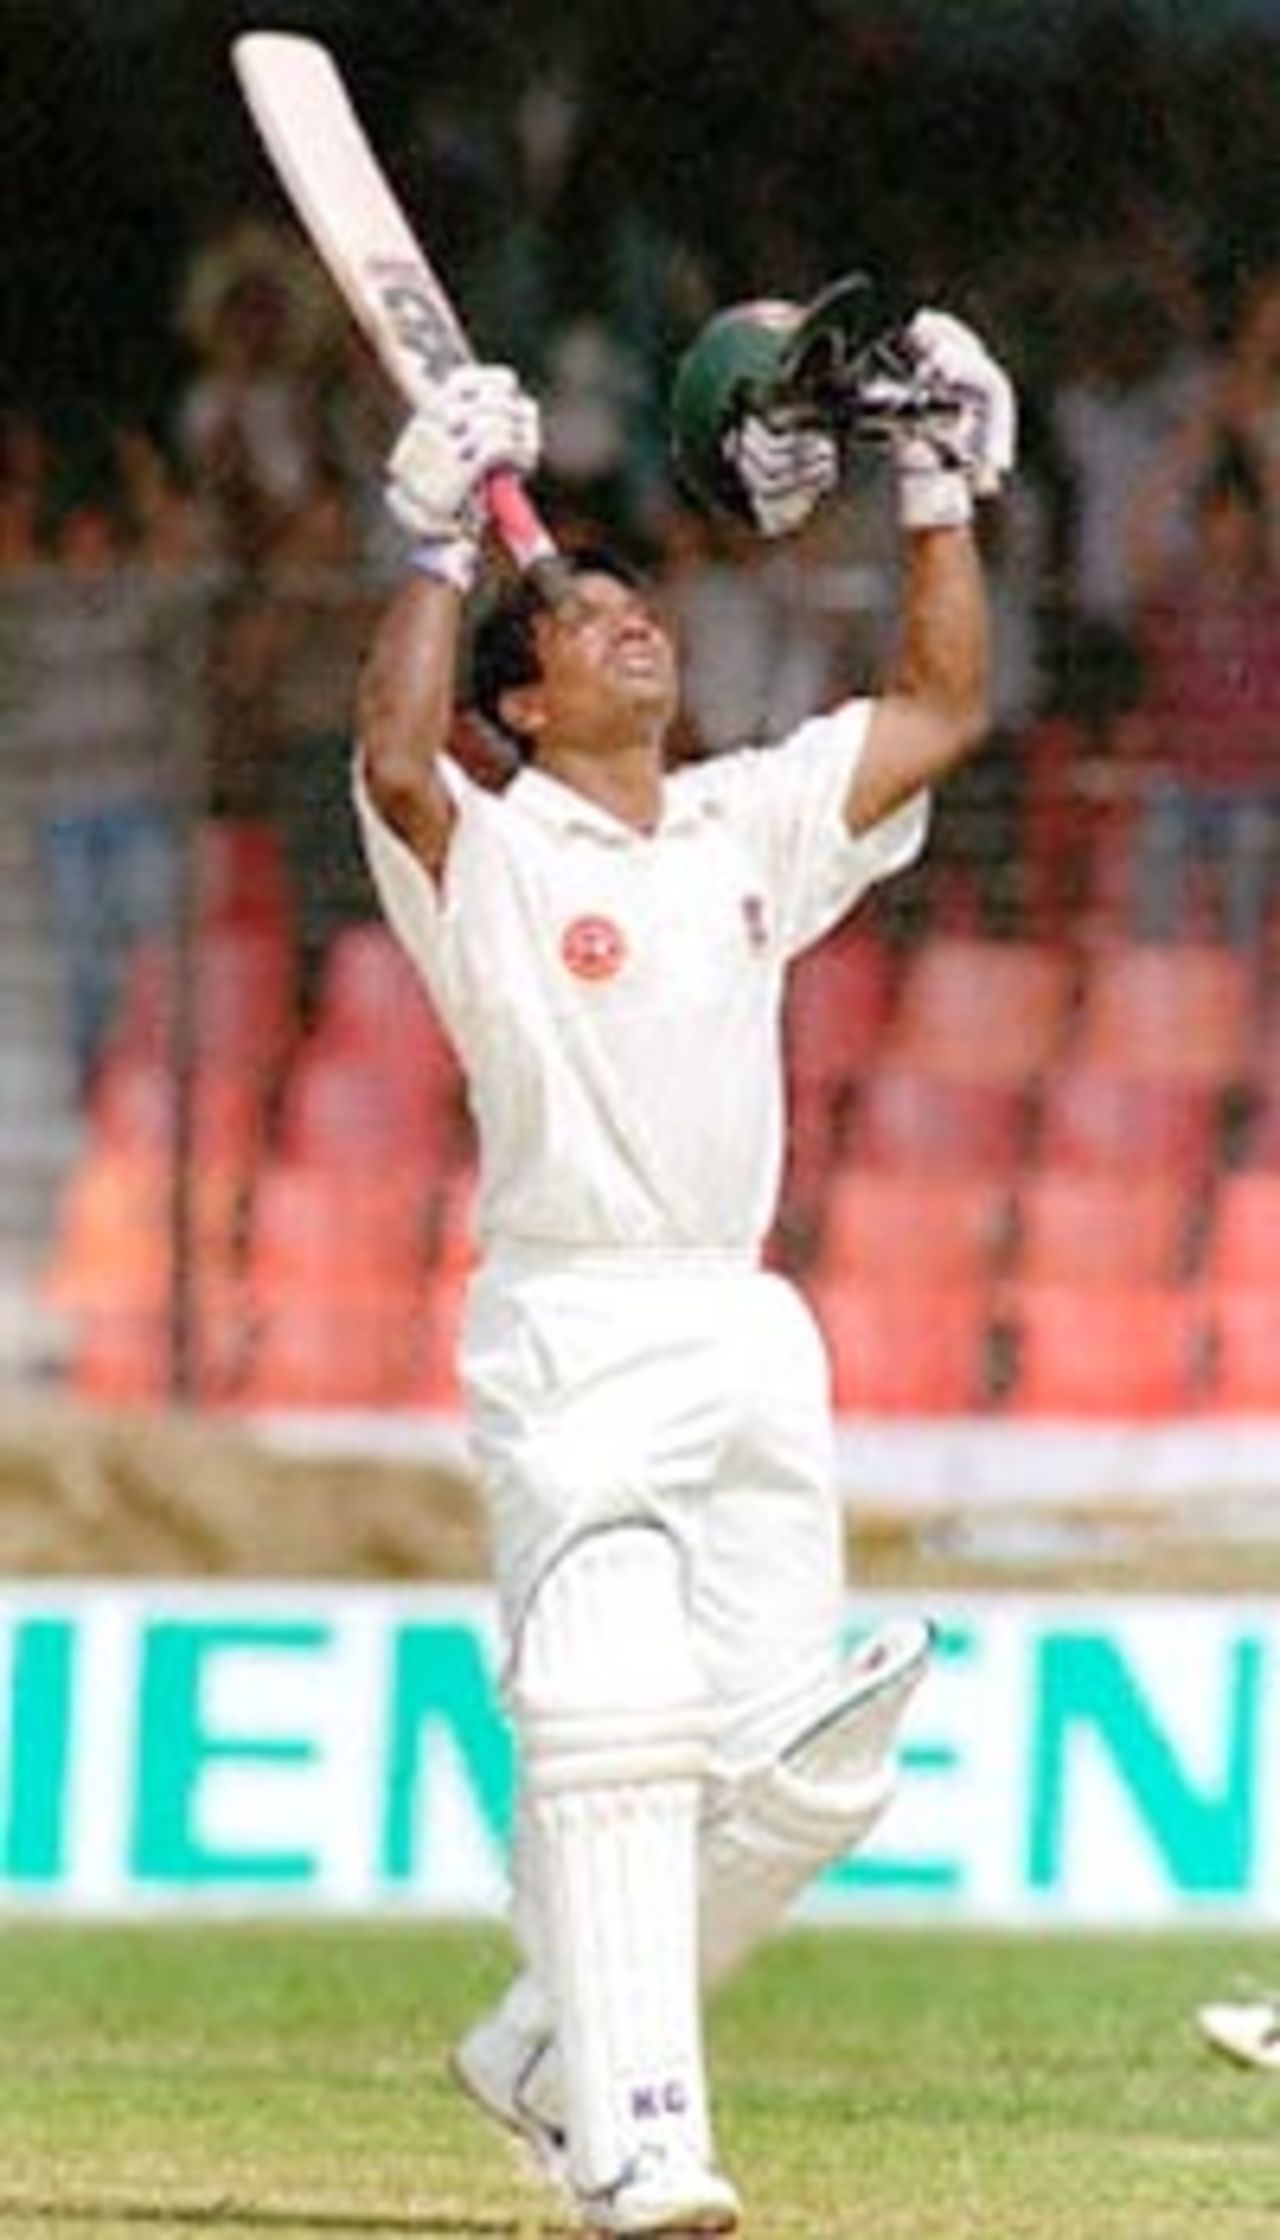 Bangladeshi batsman Aminul Islam raises his hands to celebrate after hitting a century 11 November 2000 at the Bangabandhu National Stadium on the second day of Bangladesh's inaugural test match against India. Aminul created history by becoming the third man to score a century in an inaugural test match. Bangladesh scored 302 for six at lunch on the day in their debut match.